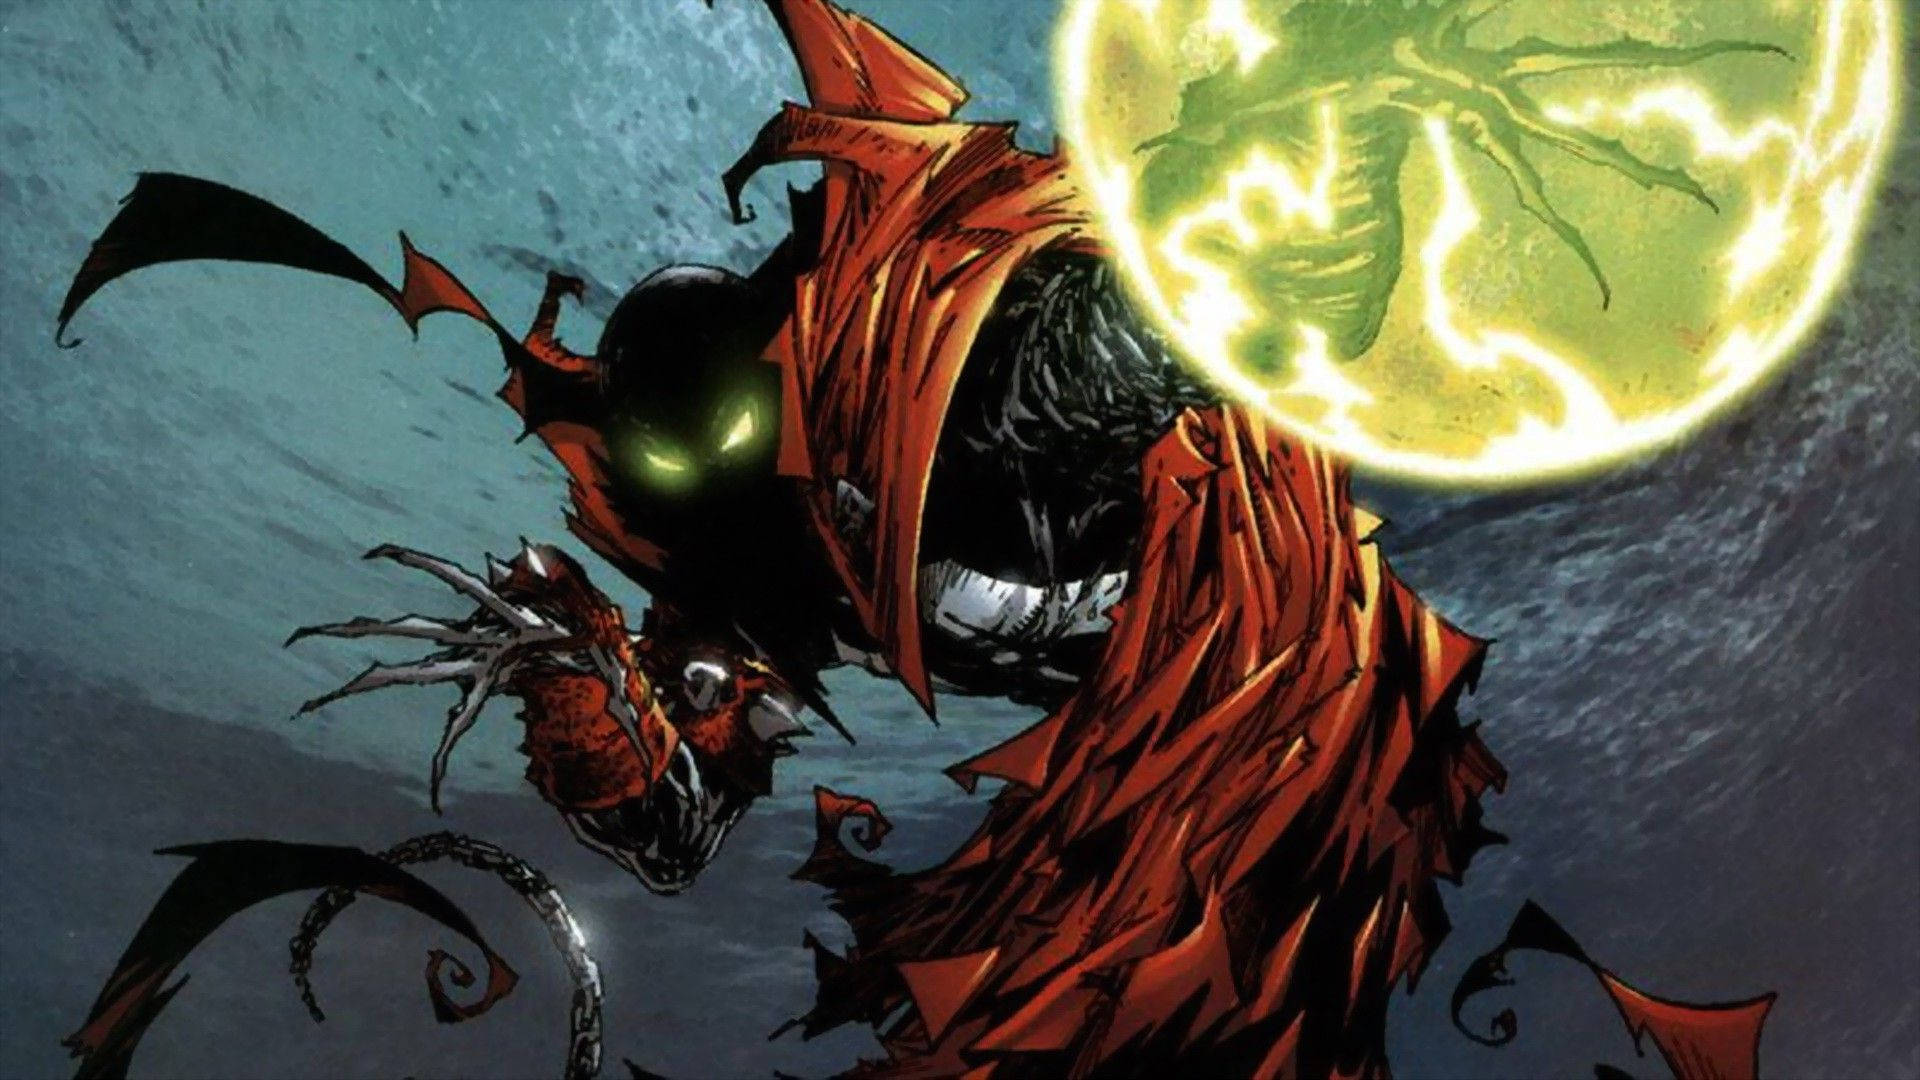 Free Spawn Wallpaper Downloads, [100+] Spawn Wallpapers for FREE |  